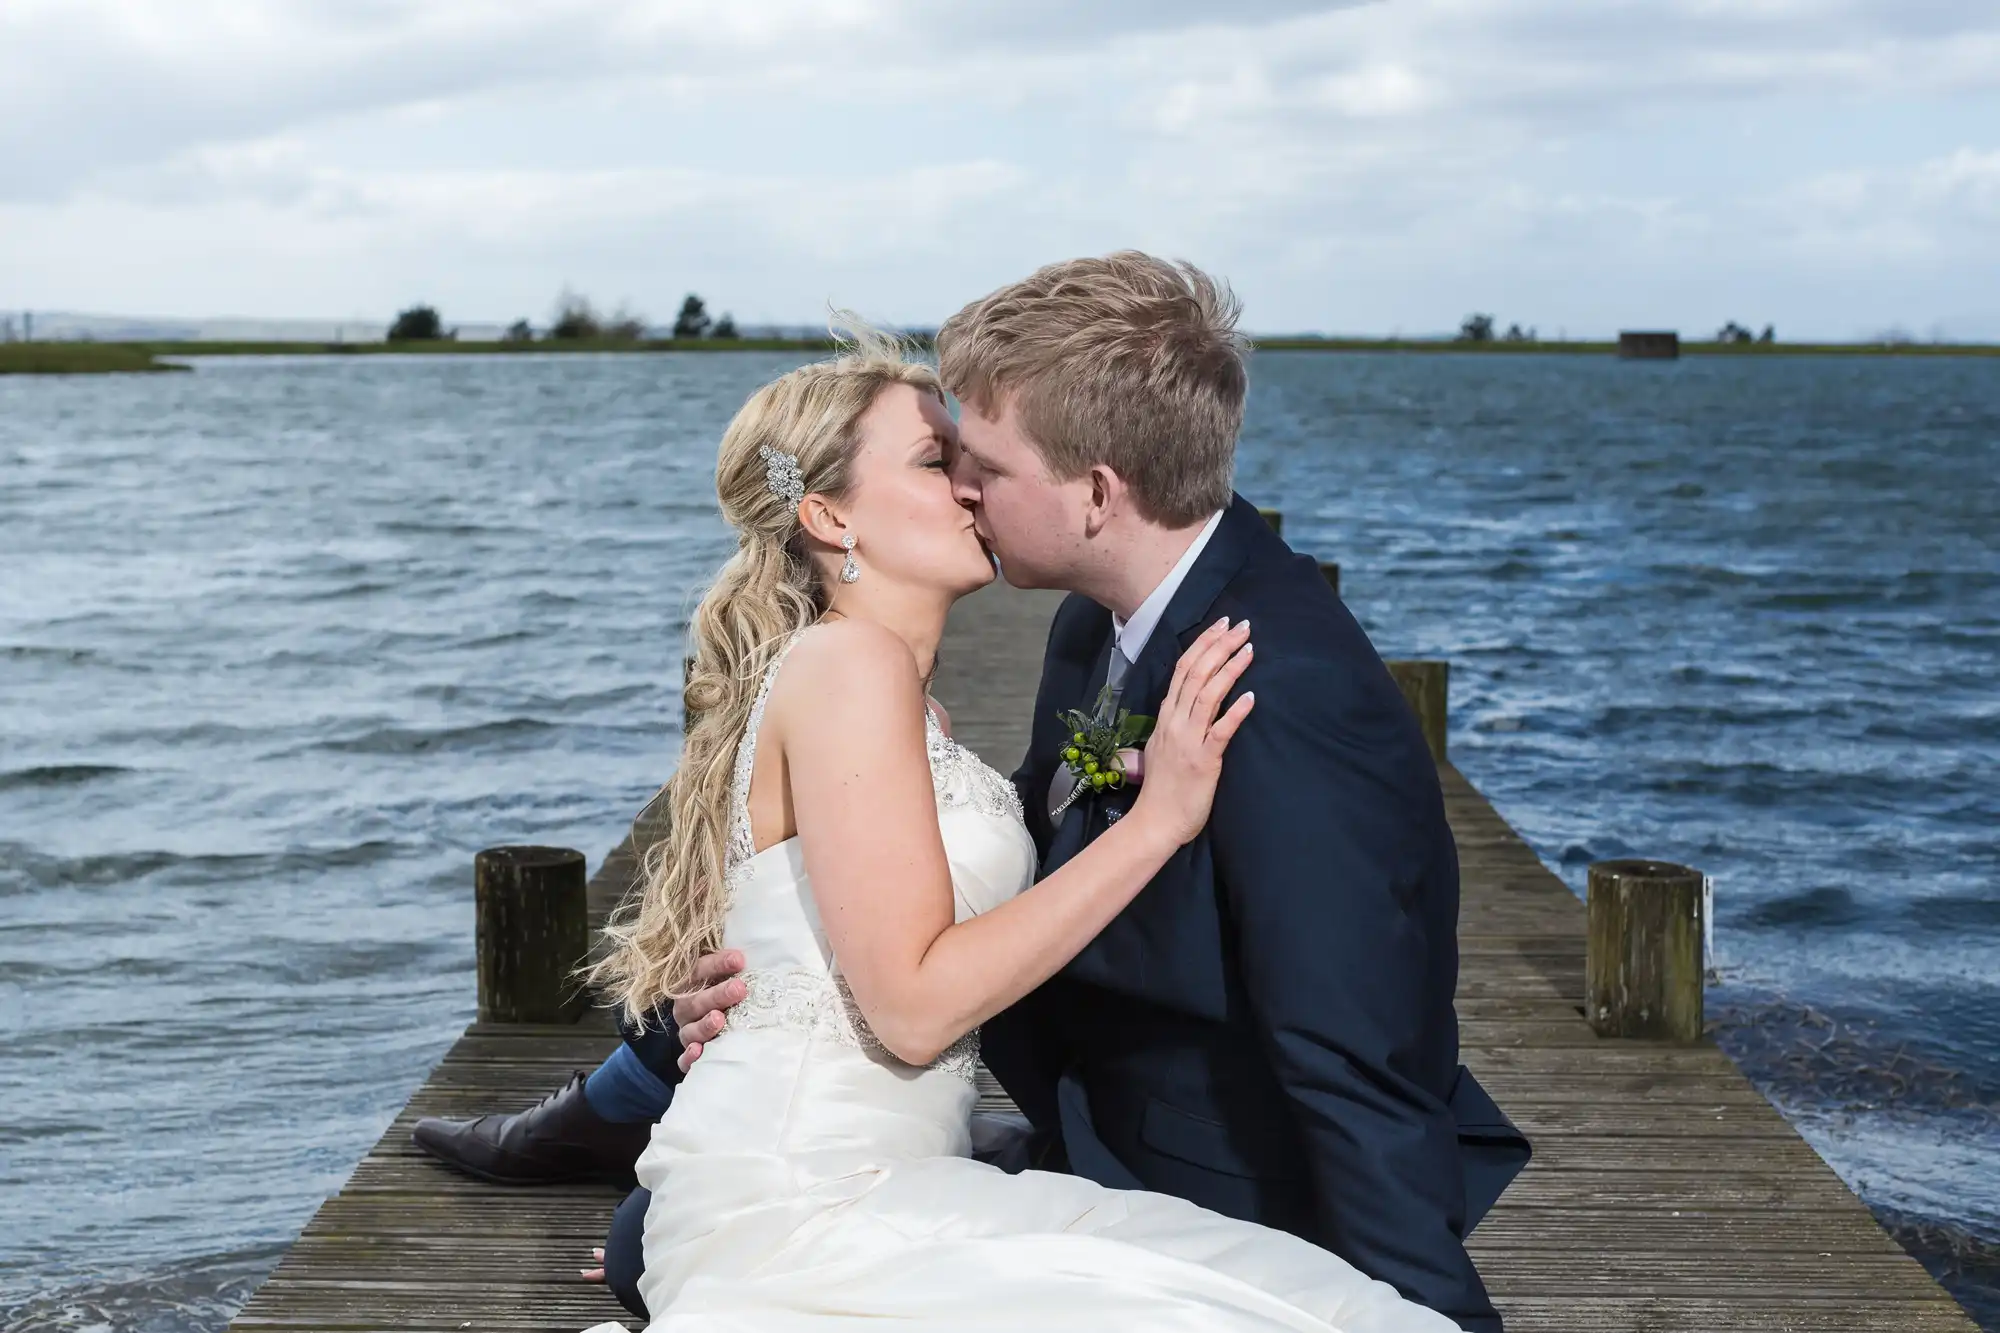 A bride and groom kissing on a wooden dock by a lake, under a cloudy sky.